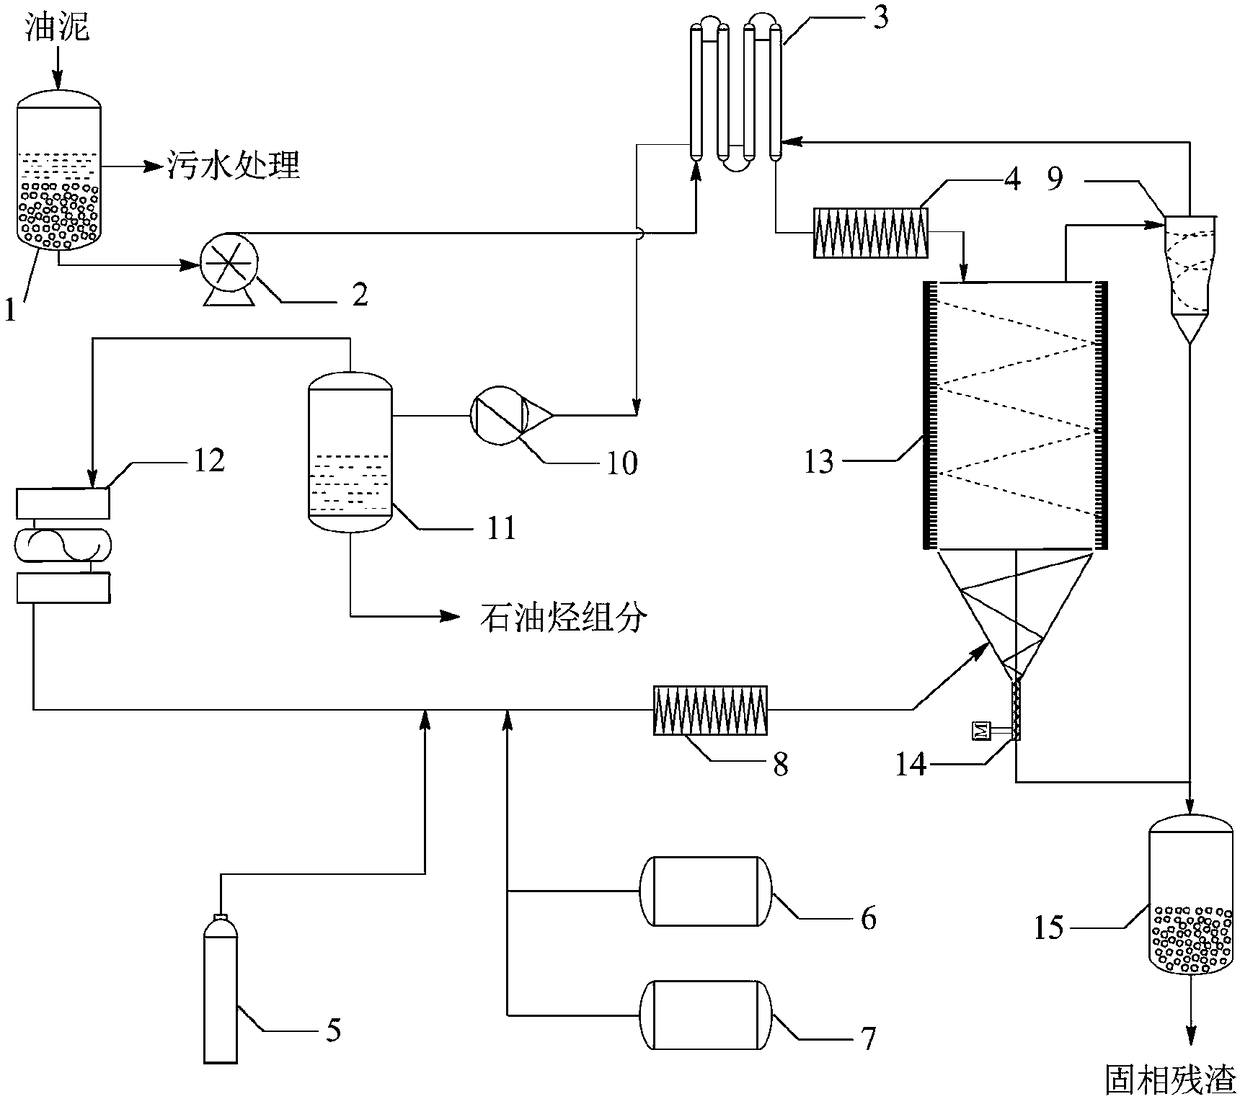 Supercritical fluid cascade extraction and oxidative degradation coupling combined process for treating oily sludge